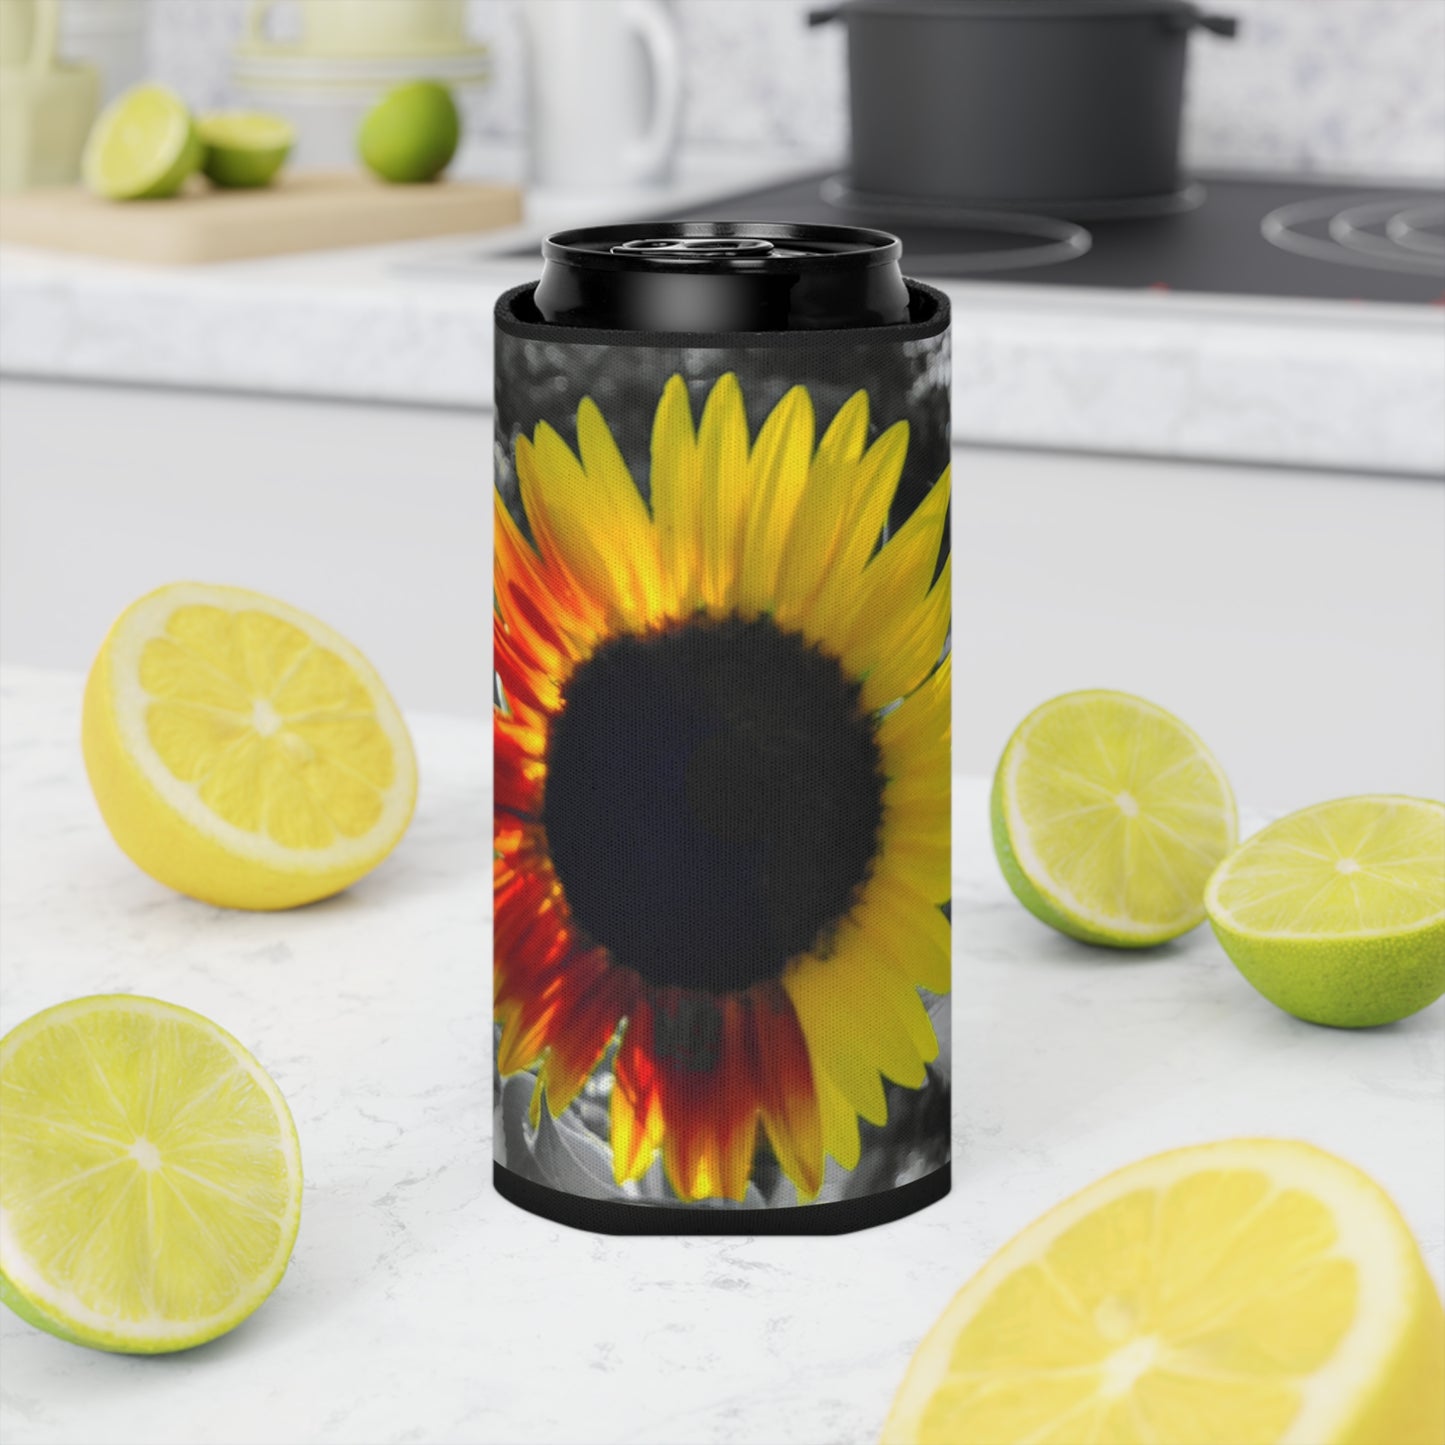 Mixed Sunflower Slim Can Cooler Sleeve (Enchanted Exposures By Tammy Lyne) BLACK